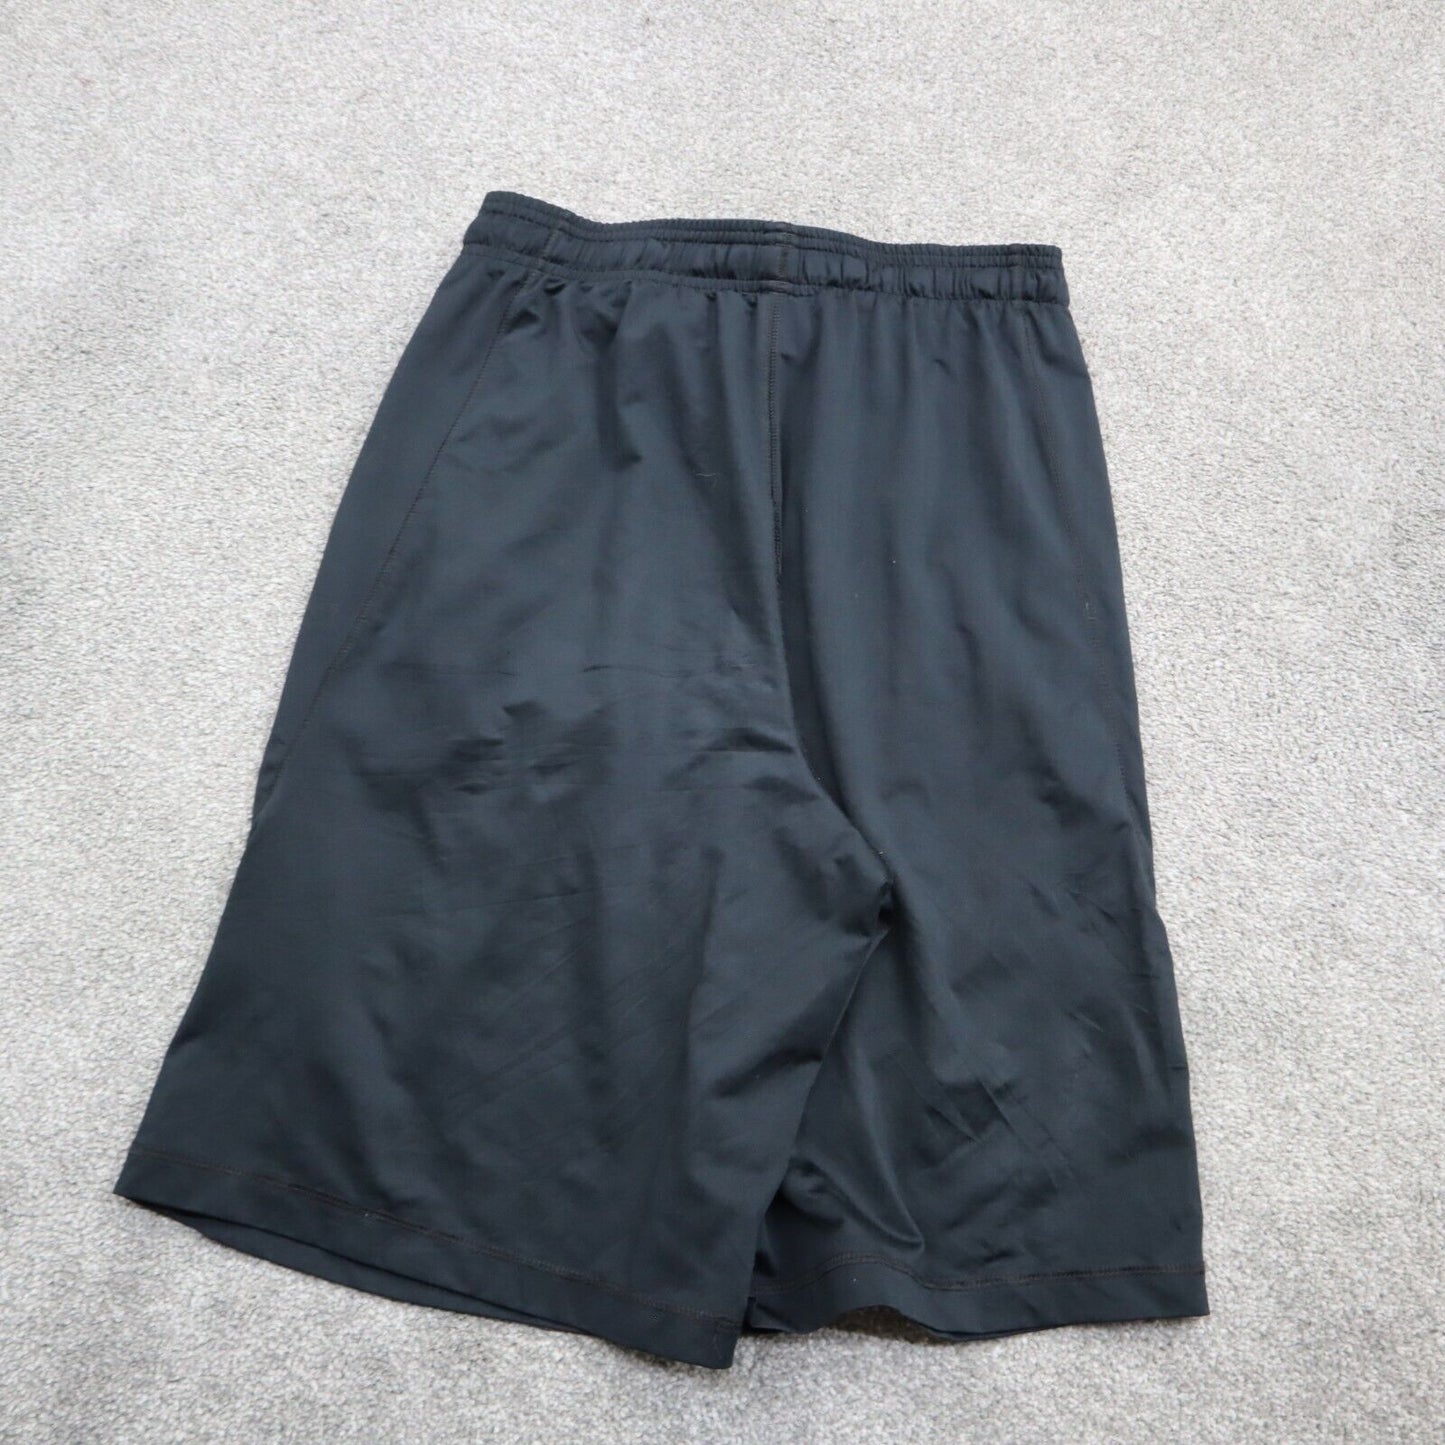 Under Armour Mens Activewear Short Loose Fit Drawstring Waist Black Size Small